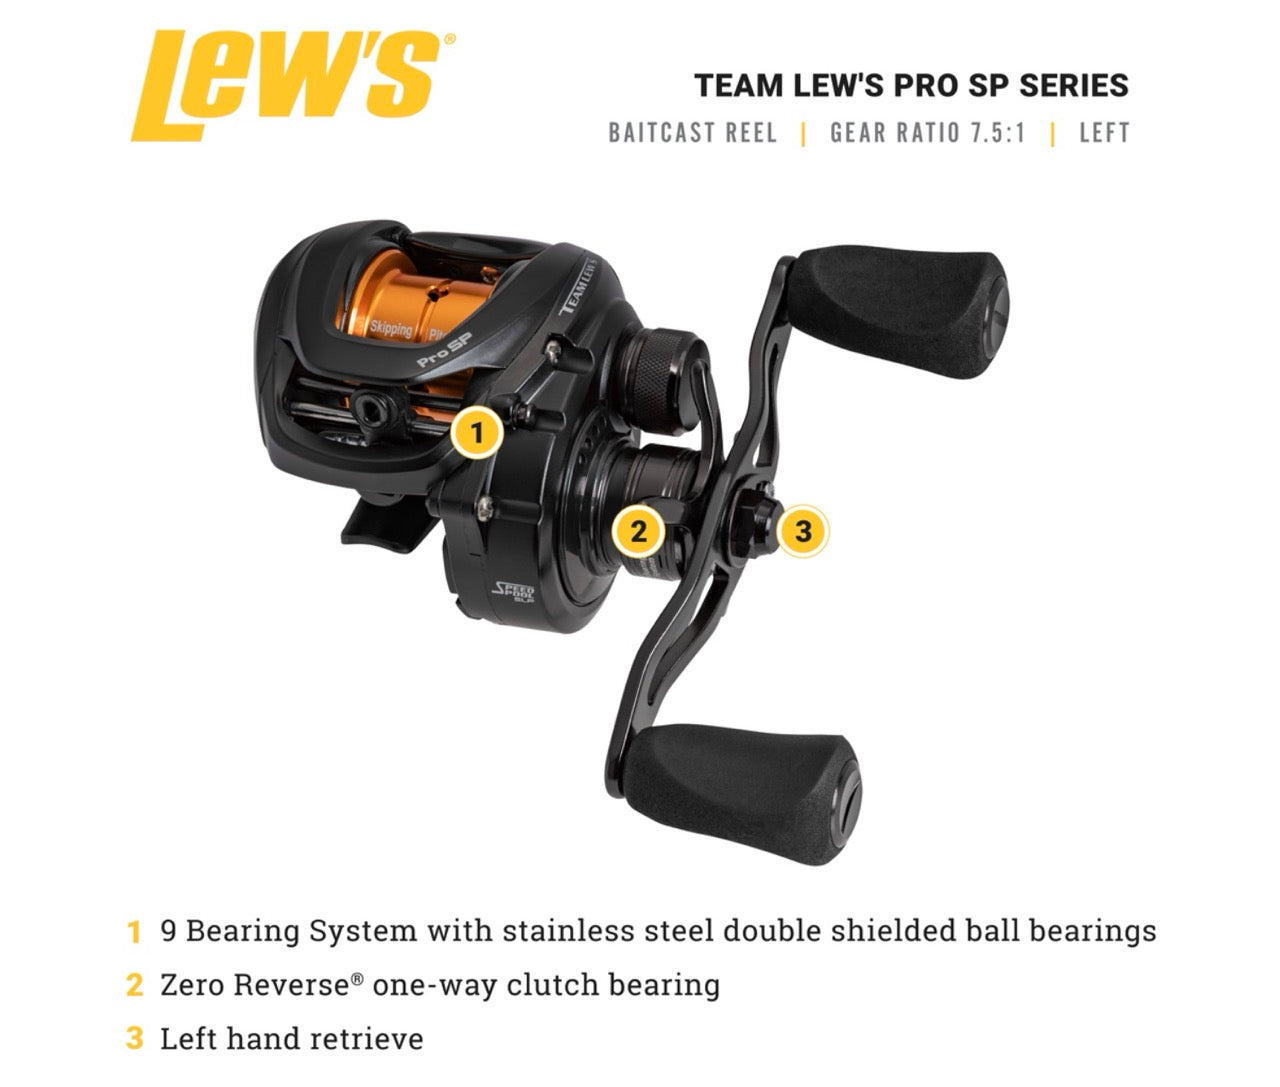 LEW'S TEAM LEW'S PRO SPINNING SKIPPING & PITCHING BAITCAST REEL LH 7.5:1